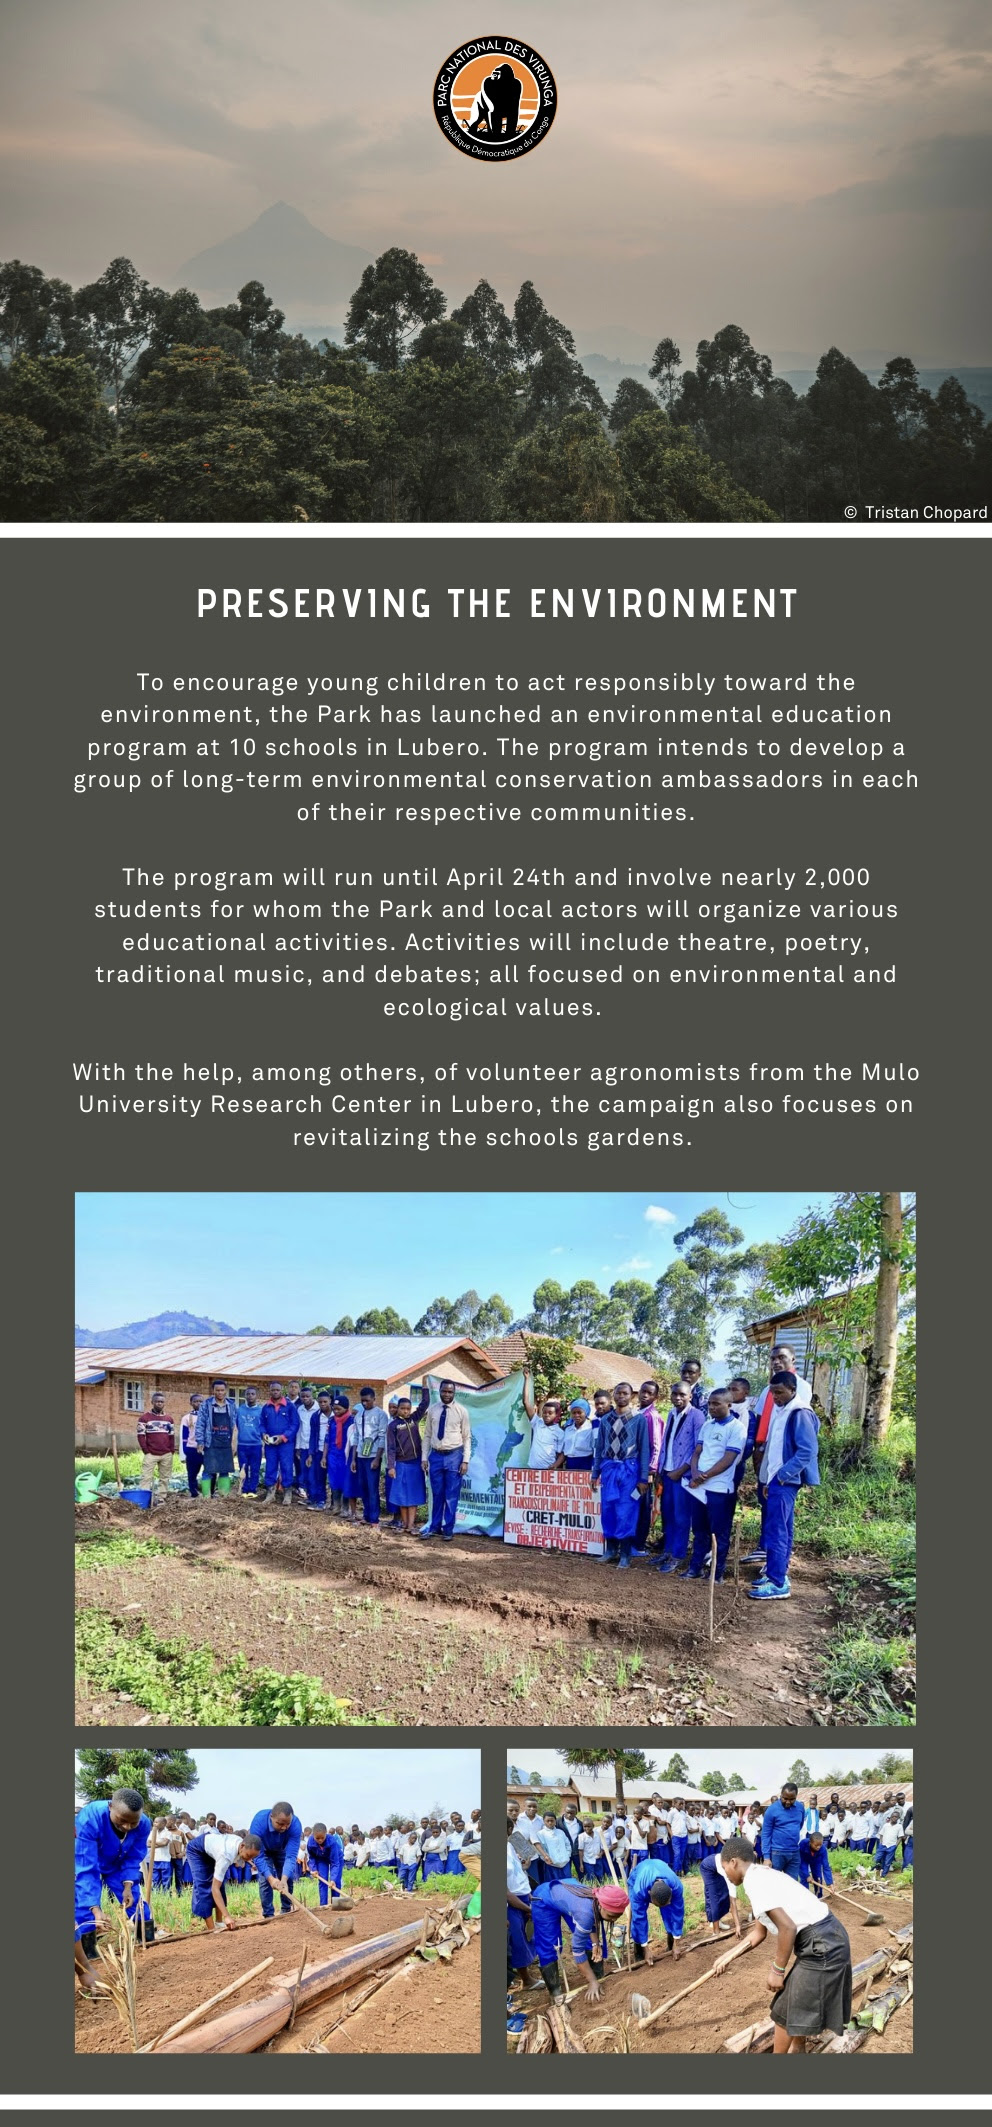 To encourage young children to act responsibly toward the environment, the Park has launched an environmental education program at 10 schools in Lubero. The program intends to develop a group of long-term environmental conservation ambassadors in each of their respective communities.